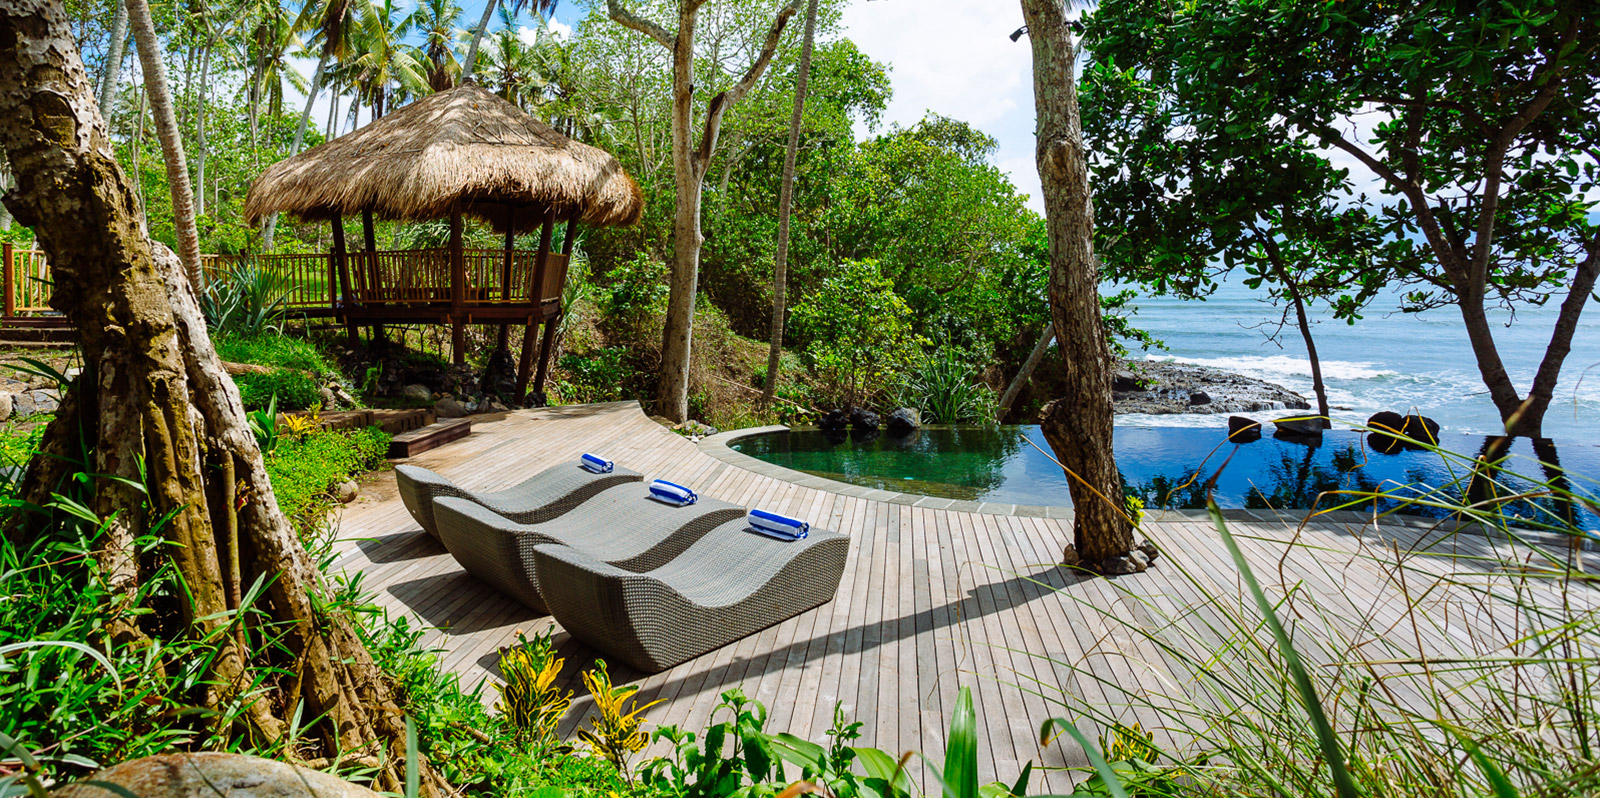 Swimming pool and lounge chairs in a beachfront Bali villa